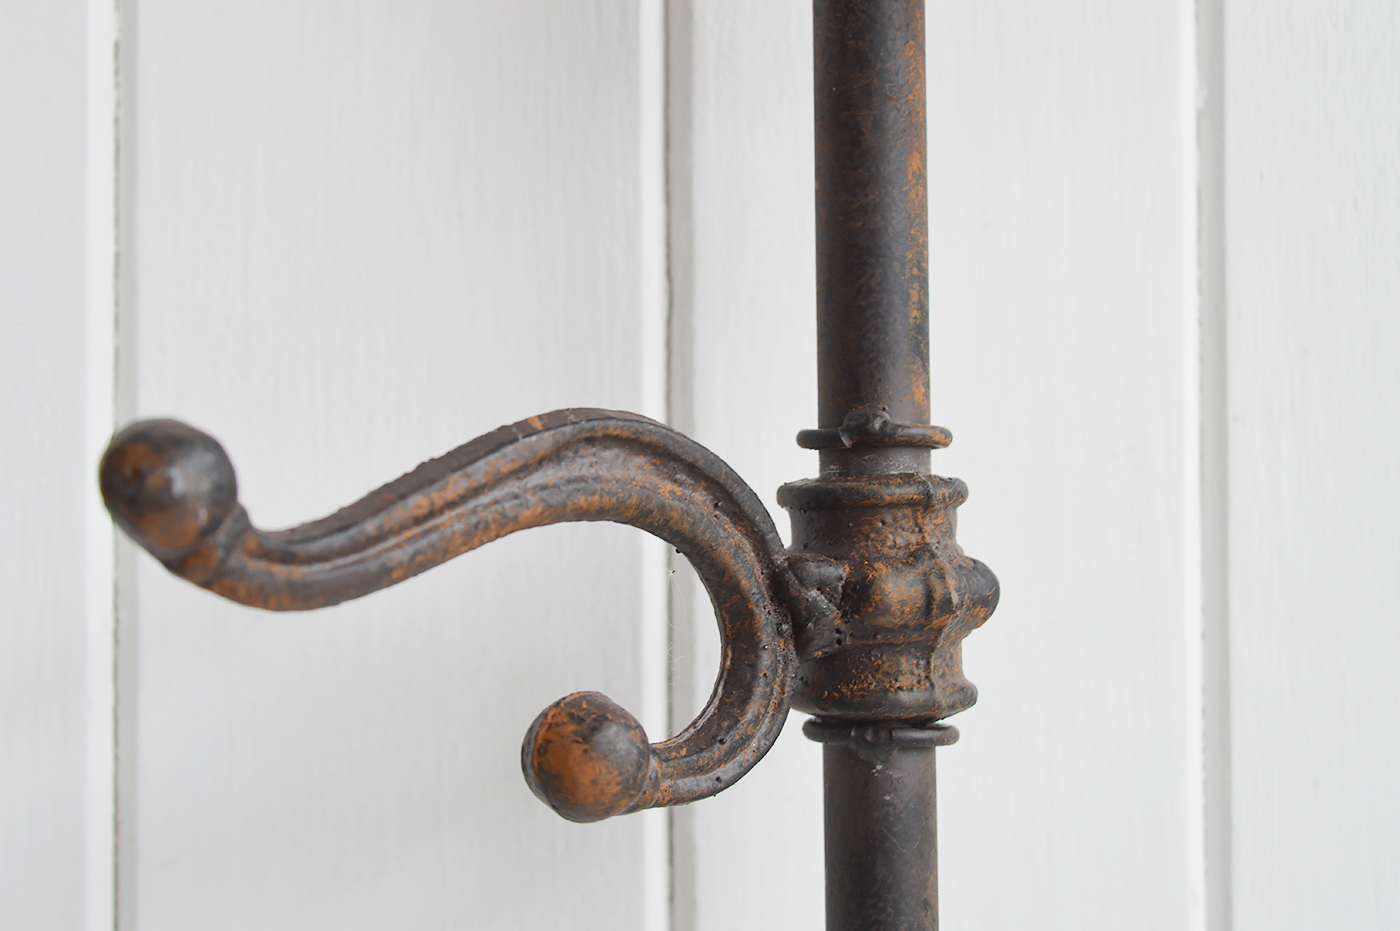 Portsmouth coat rack for small hall furniture storage - New England Coastal & Country Homes